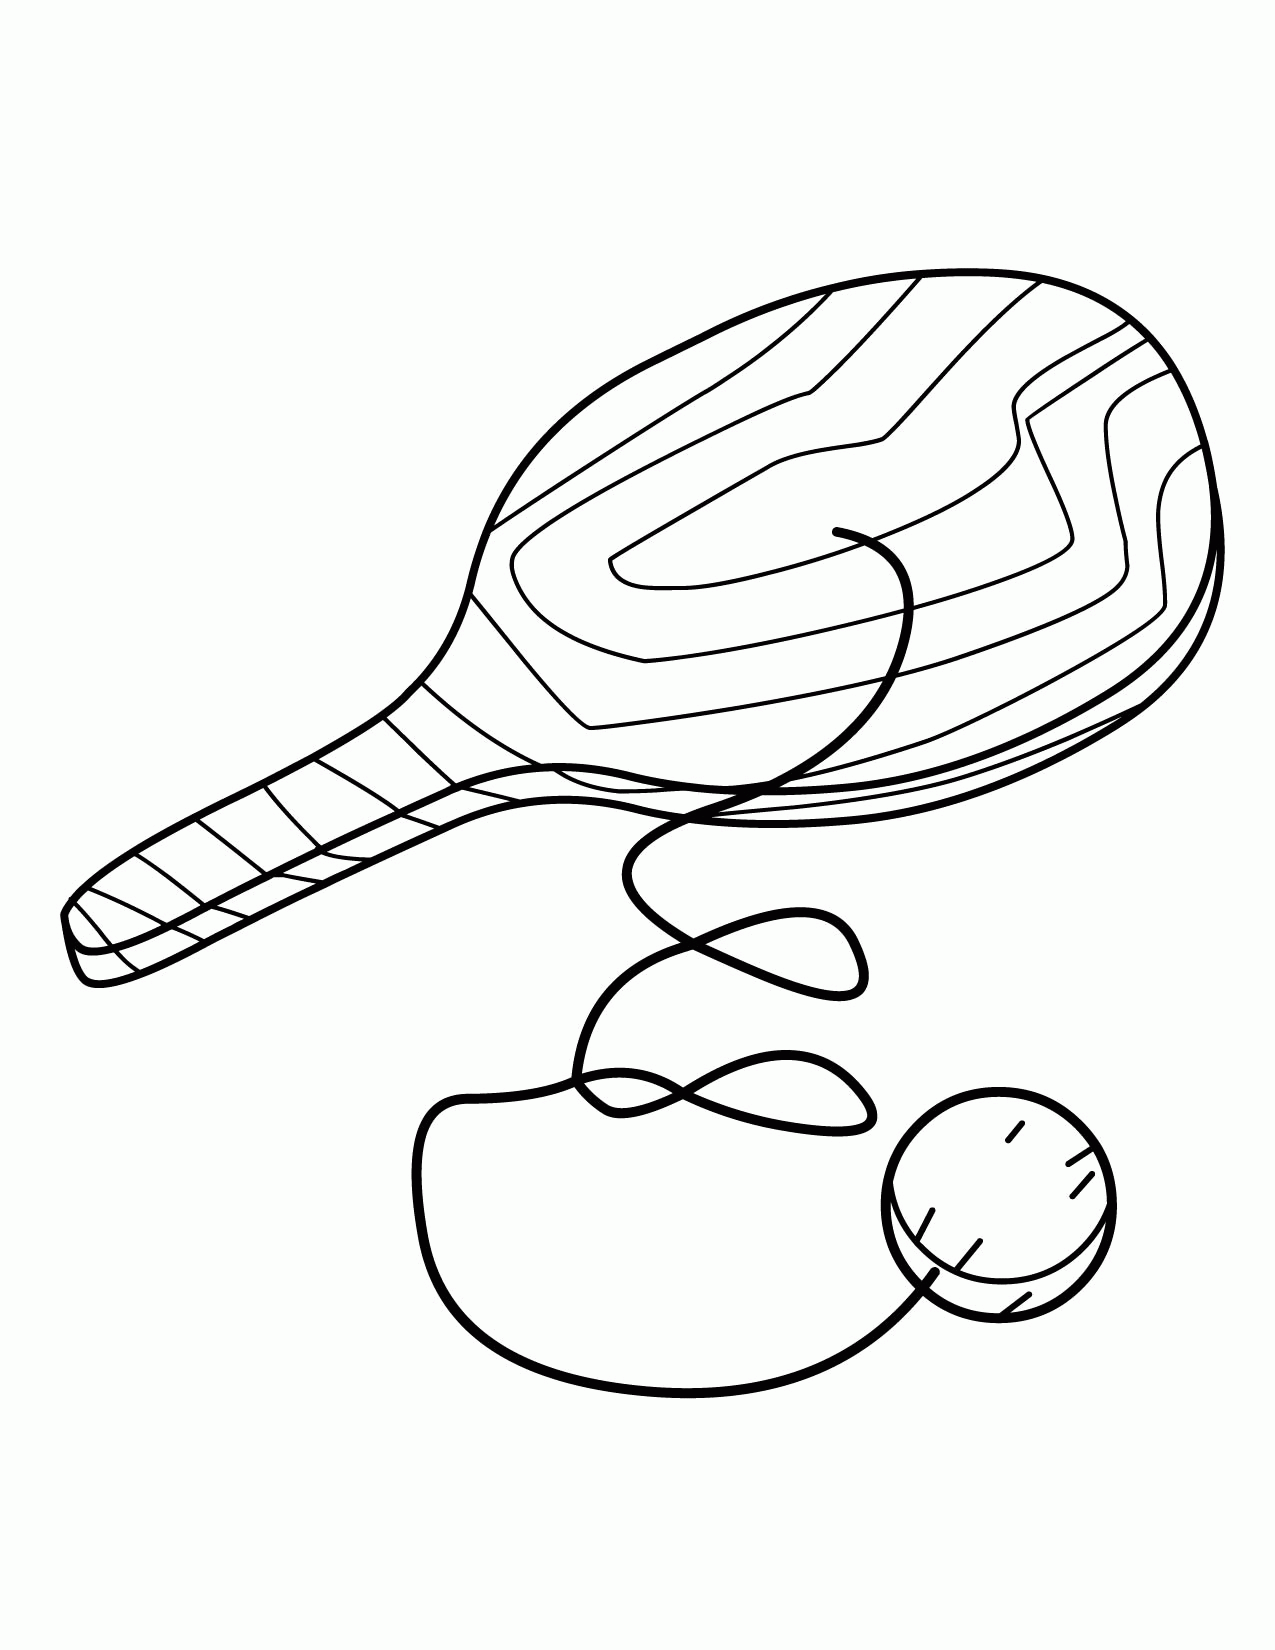 Download Coloring Page Toys - Coloring Home